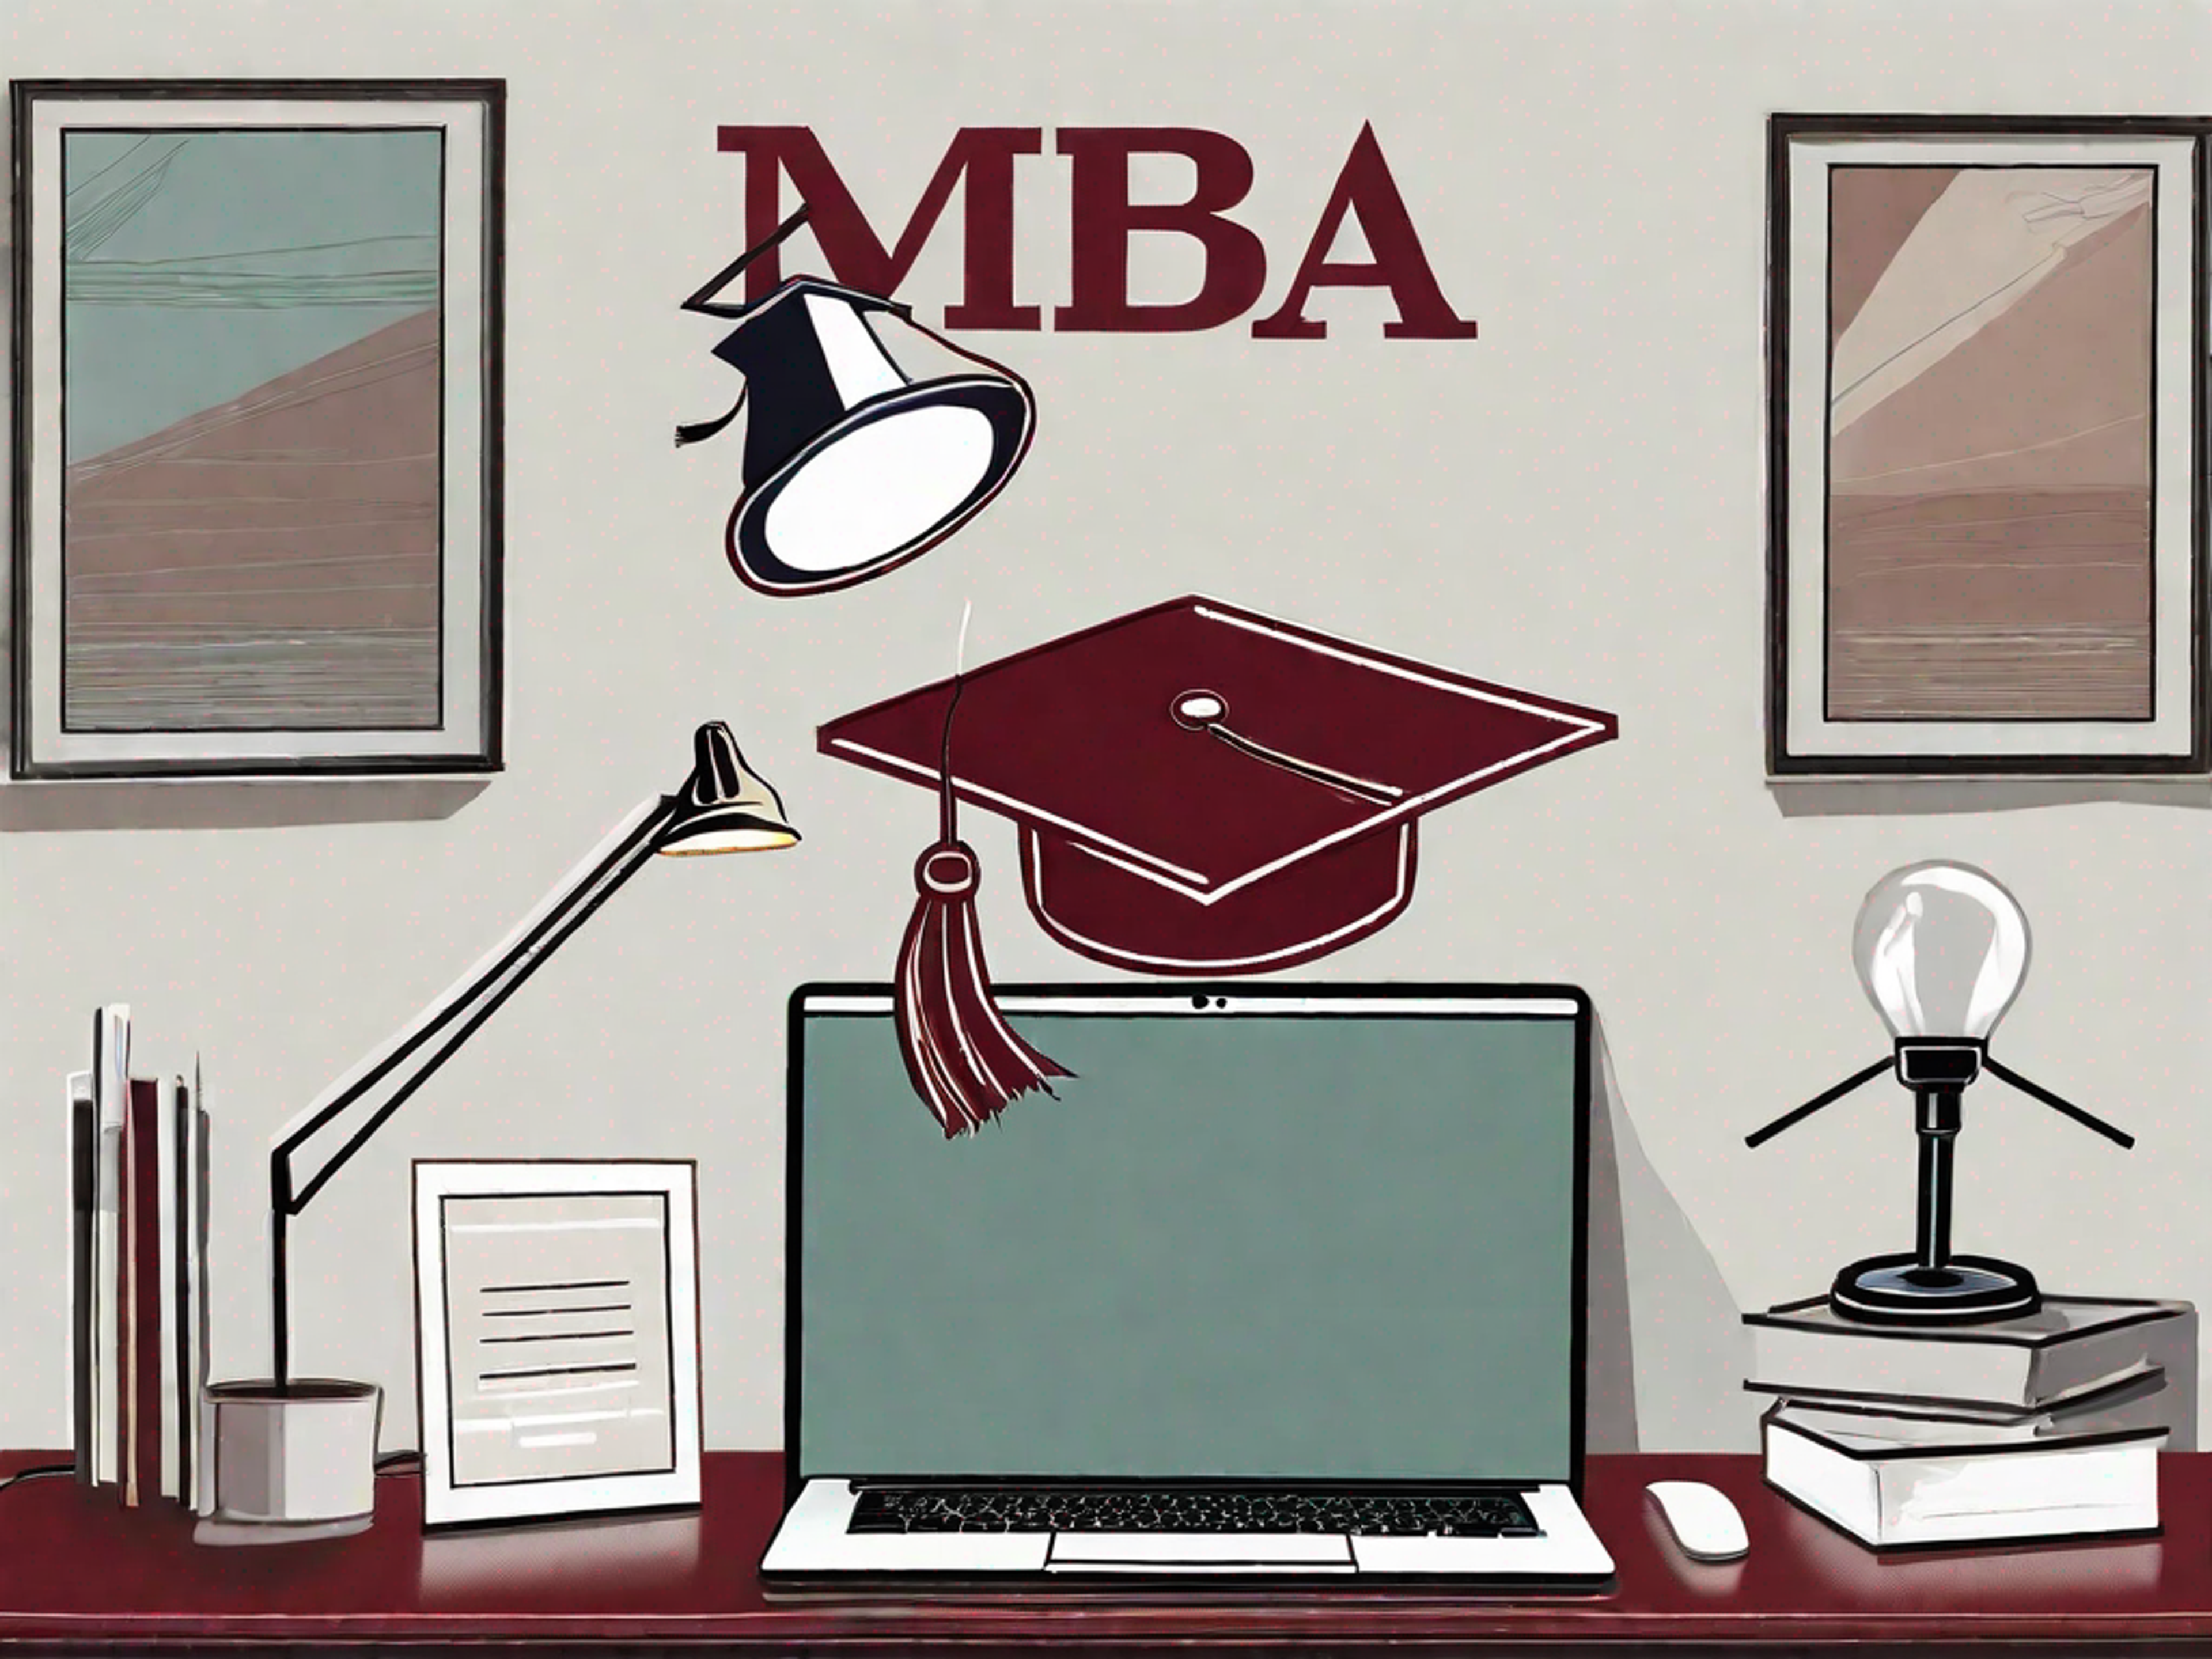 darden mba essay prompts